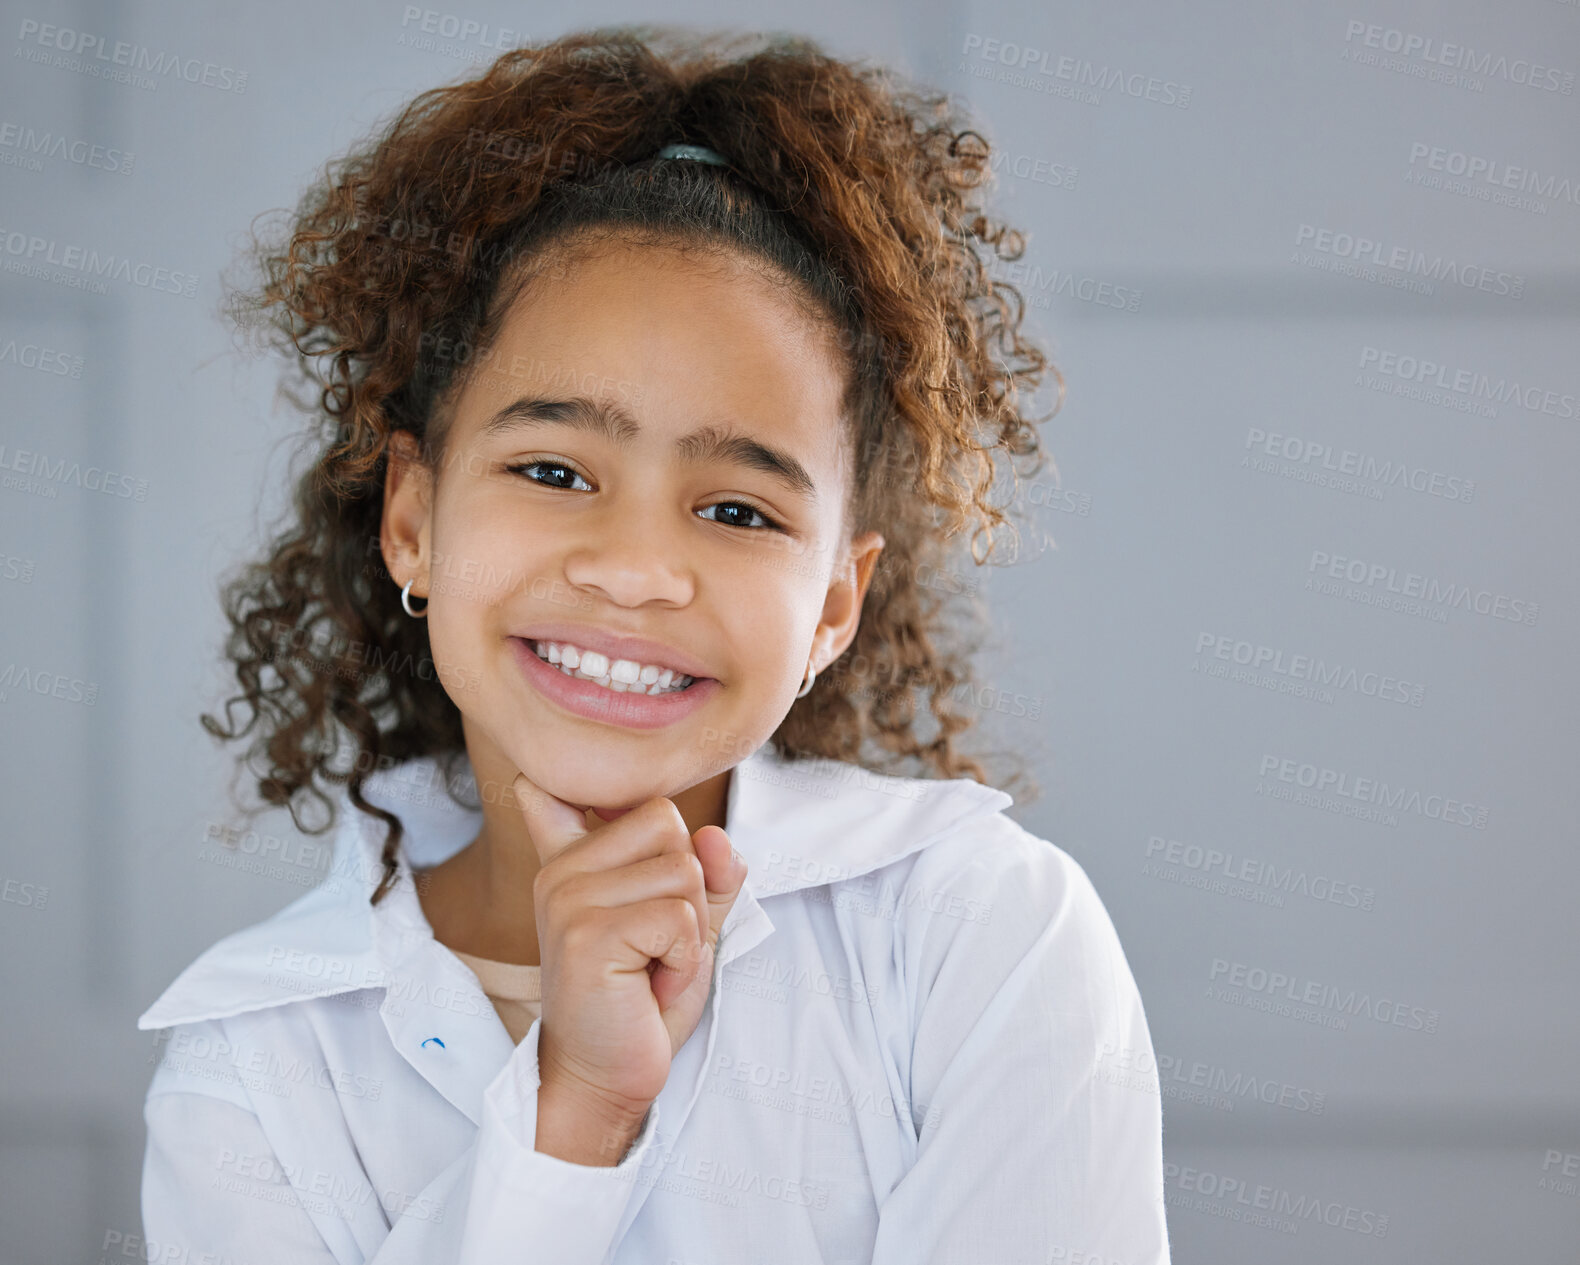 Buy stock photo Cropped portrait of an adorable little girl standing with her hand on her chin and looking thoughtful